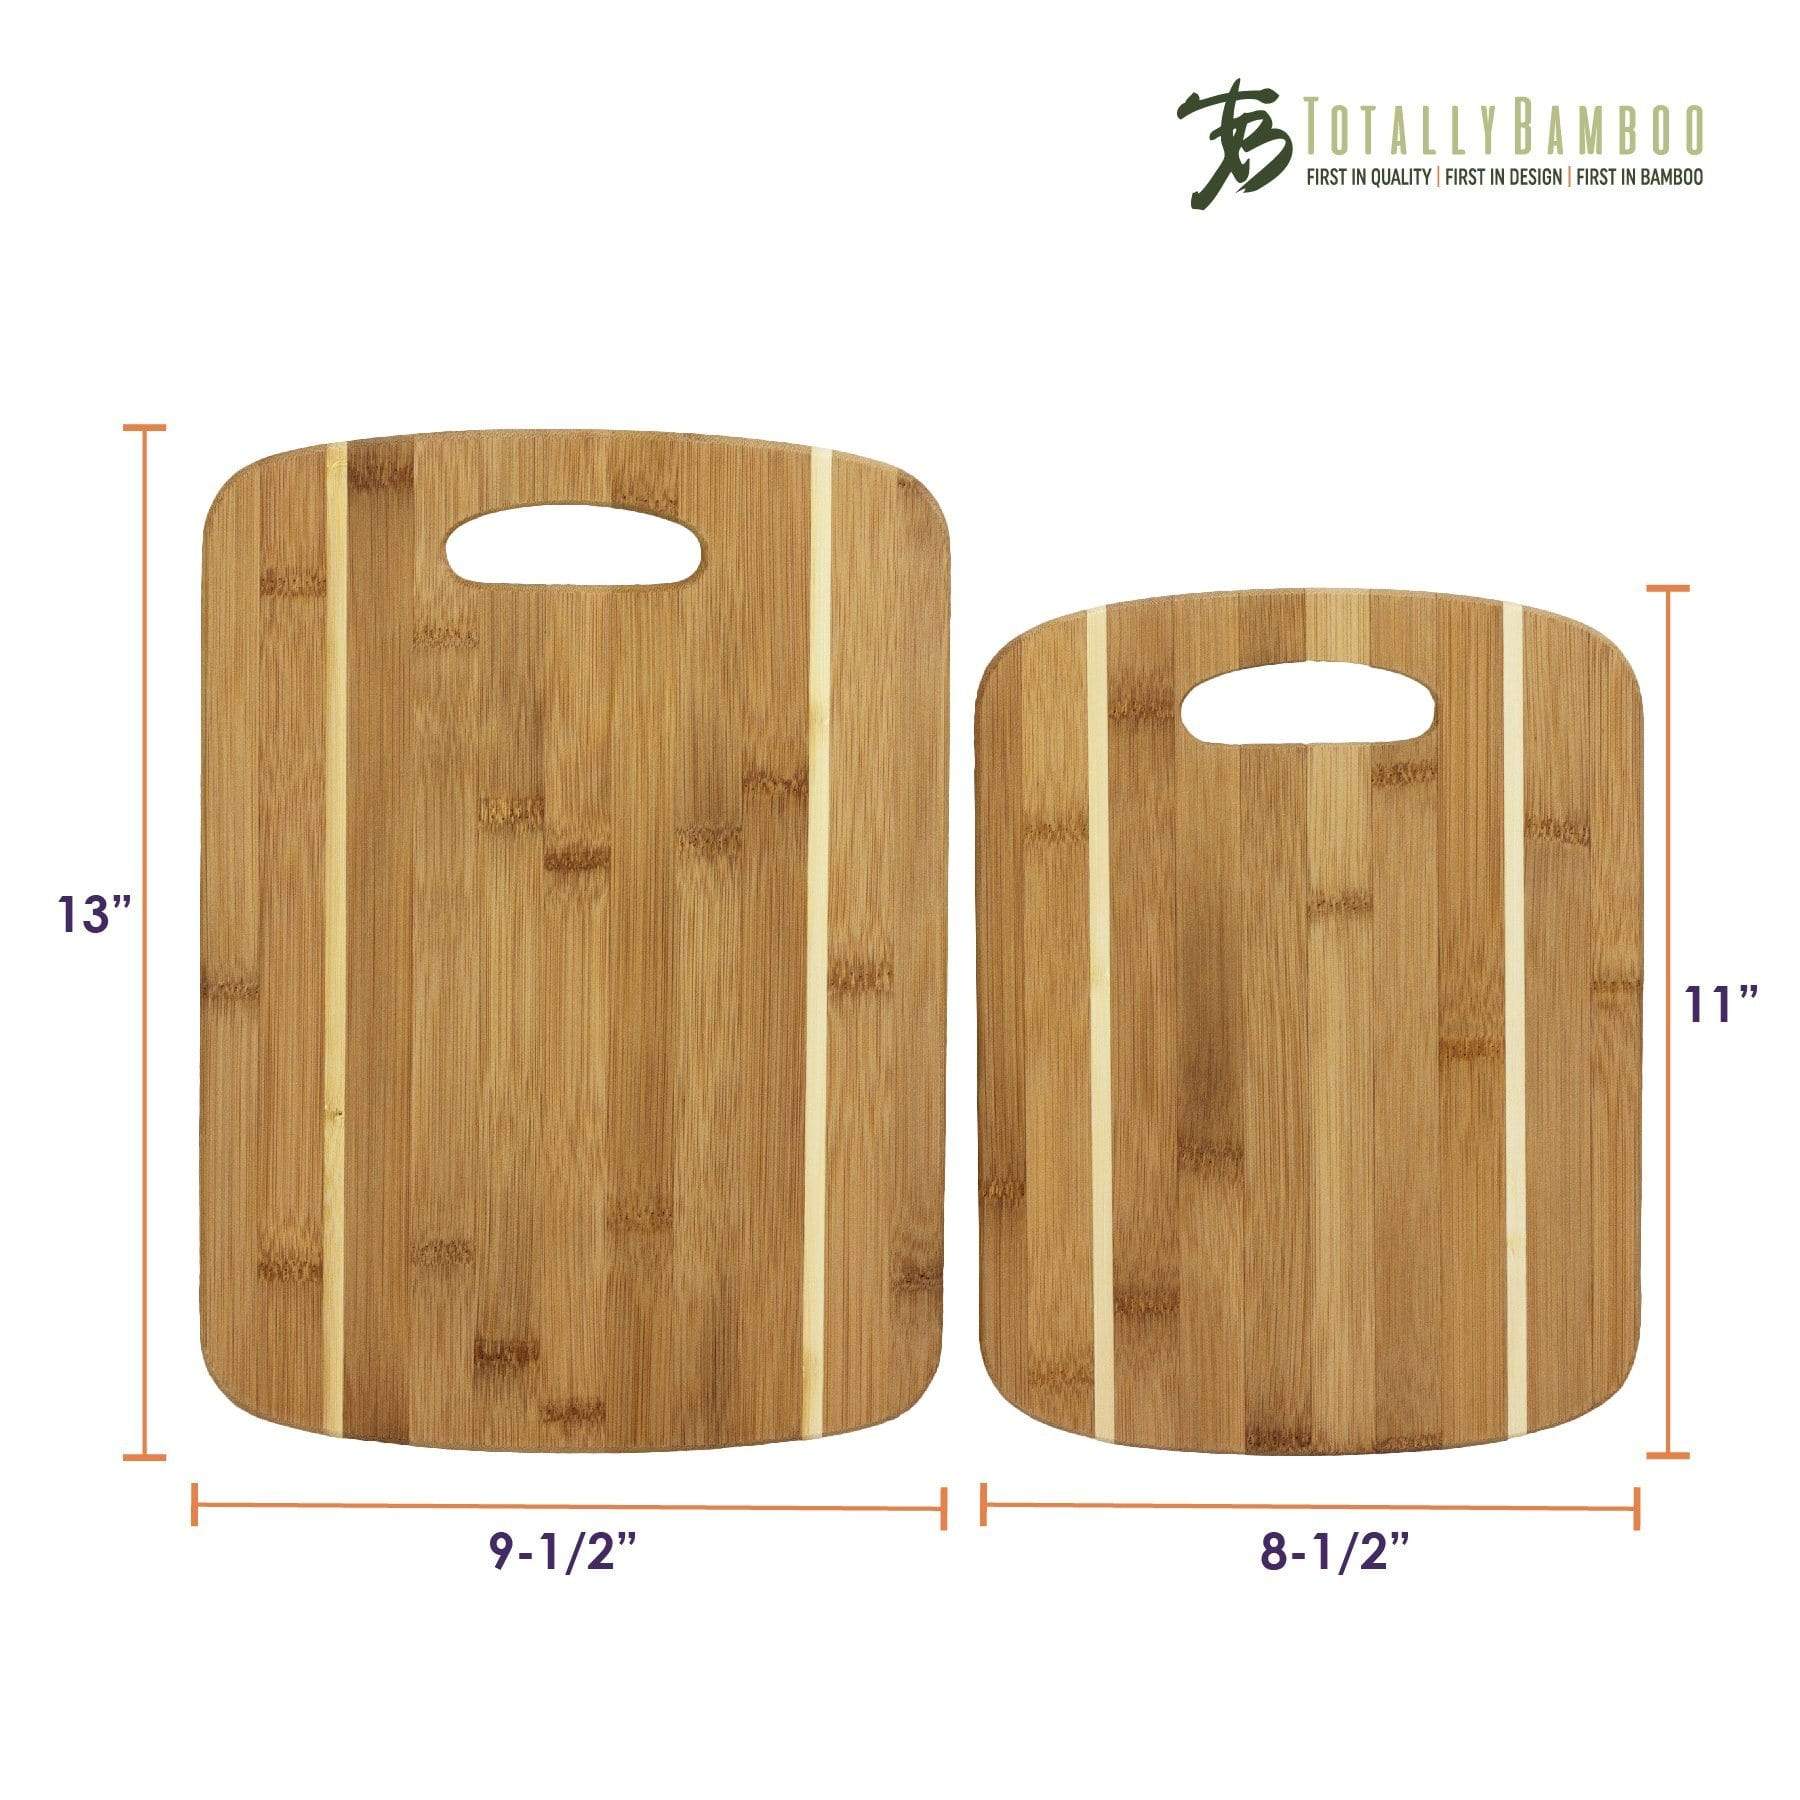 https://totallybamboo.com/cdn/shop/products/two-piece-striped-bamboo-cutting-board-set-13-x-9-12-and-11-x-8-12-totally-bamboo-671209.jpg?v=1628013304